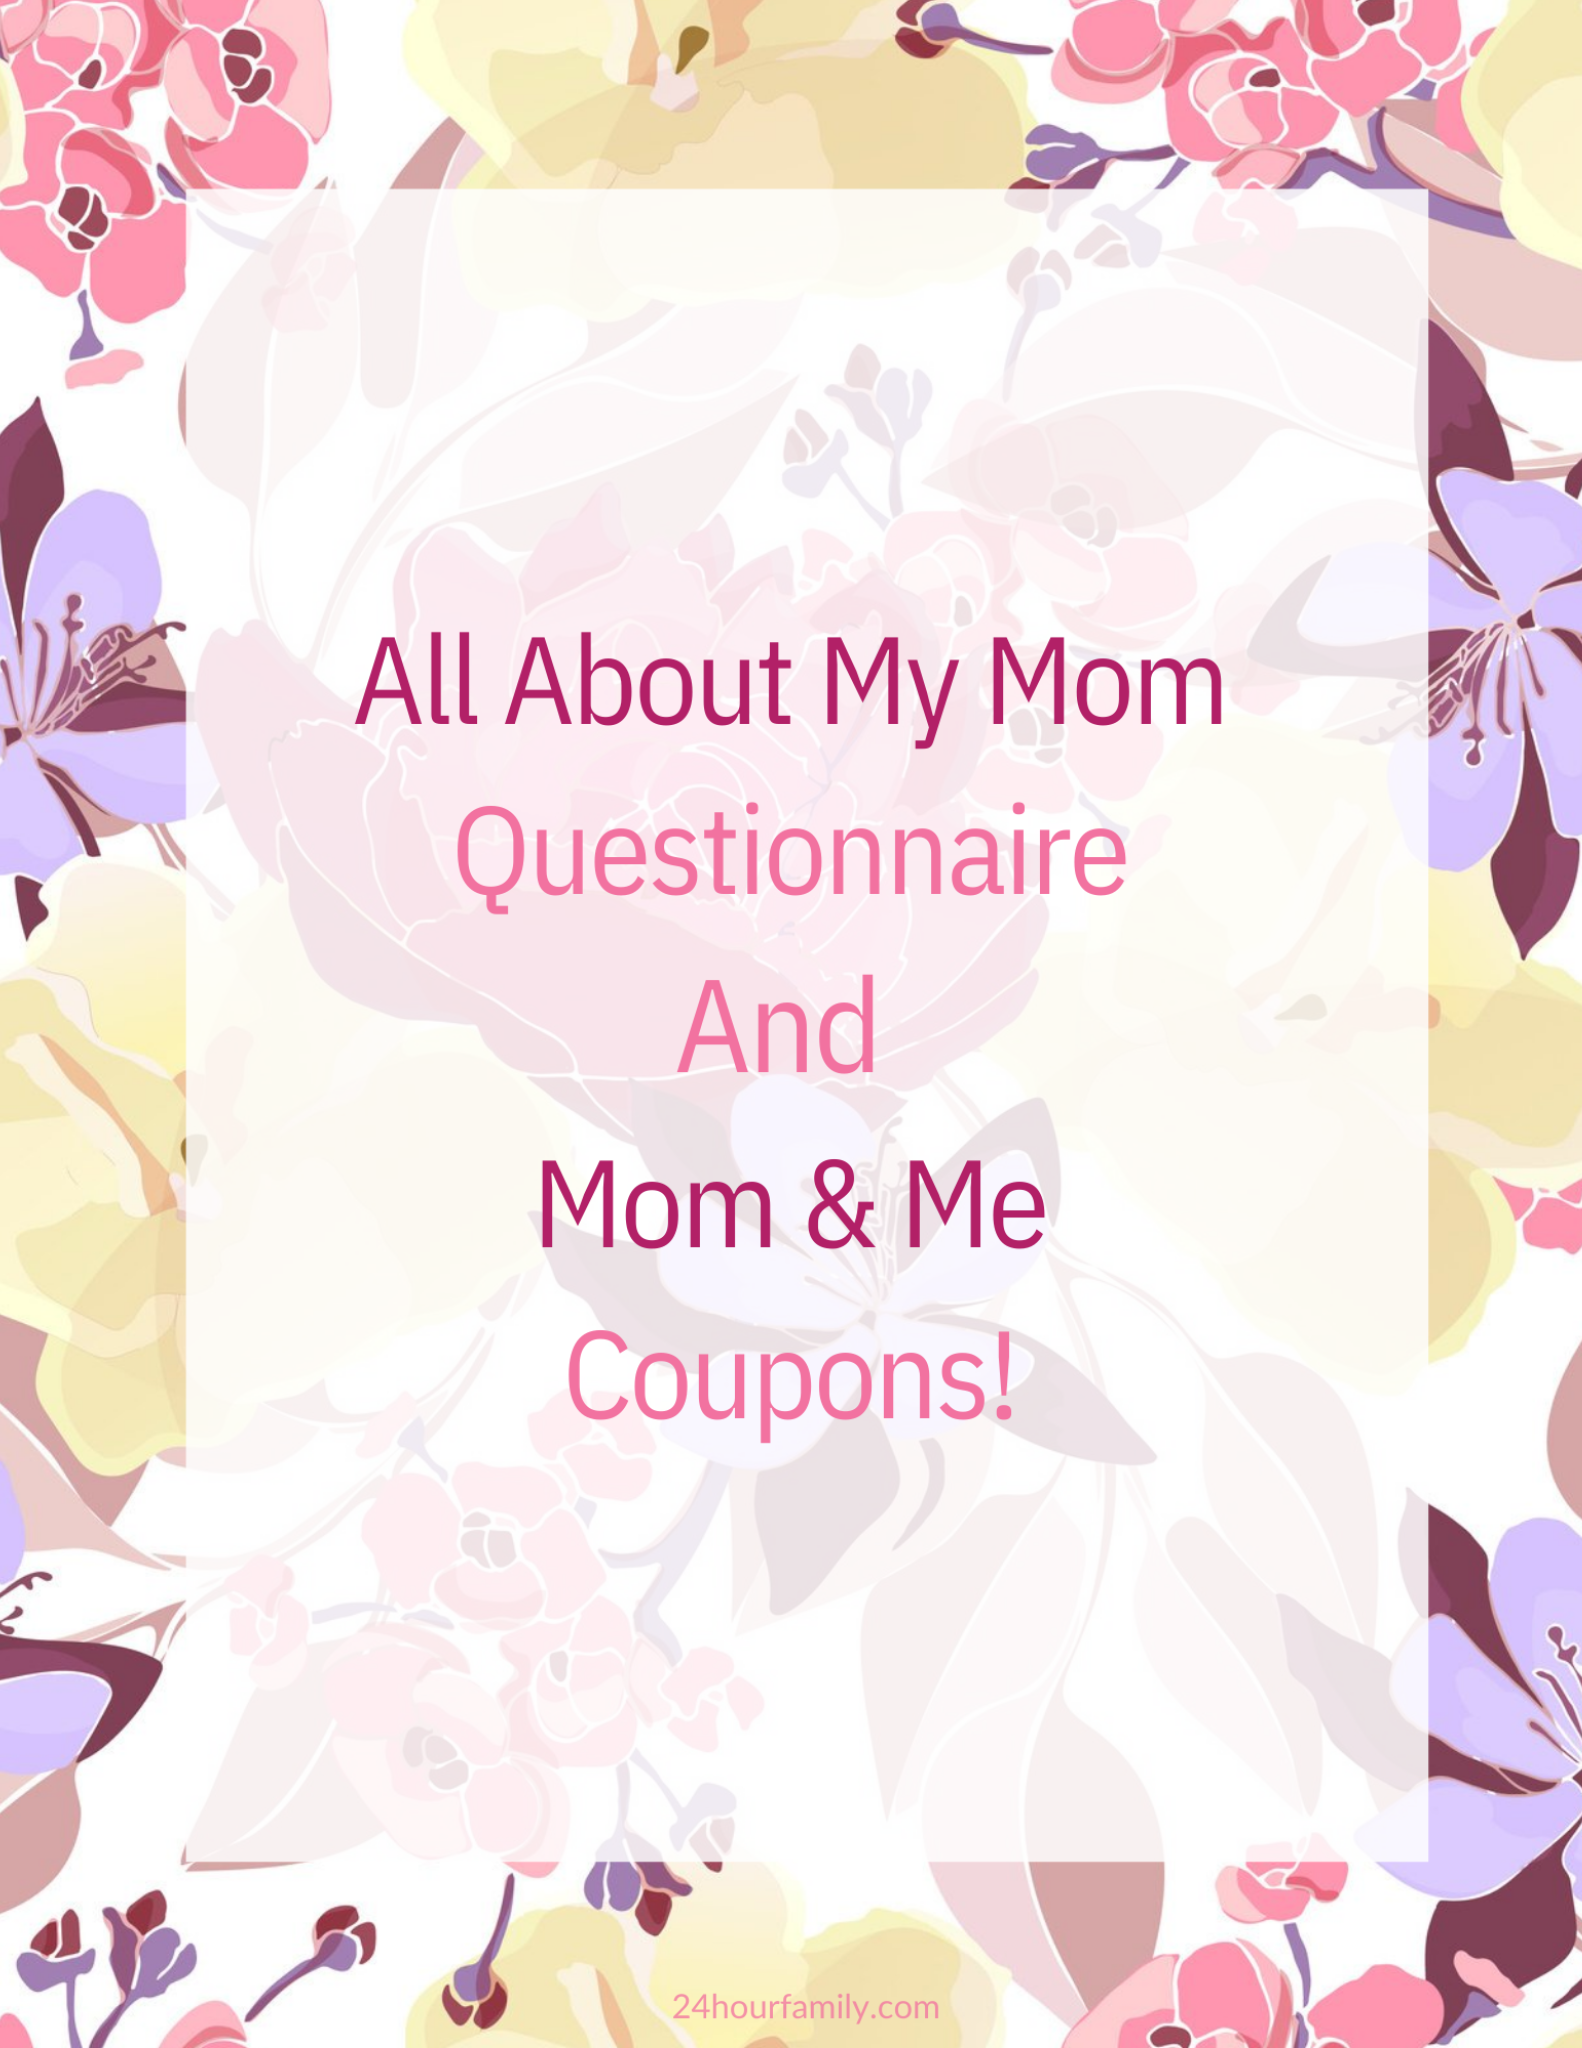 All about my mom questionaire and mom & Me coupons